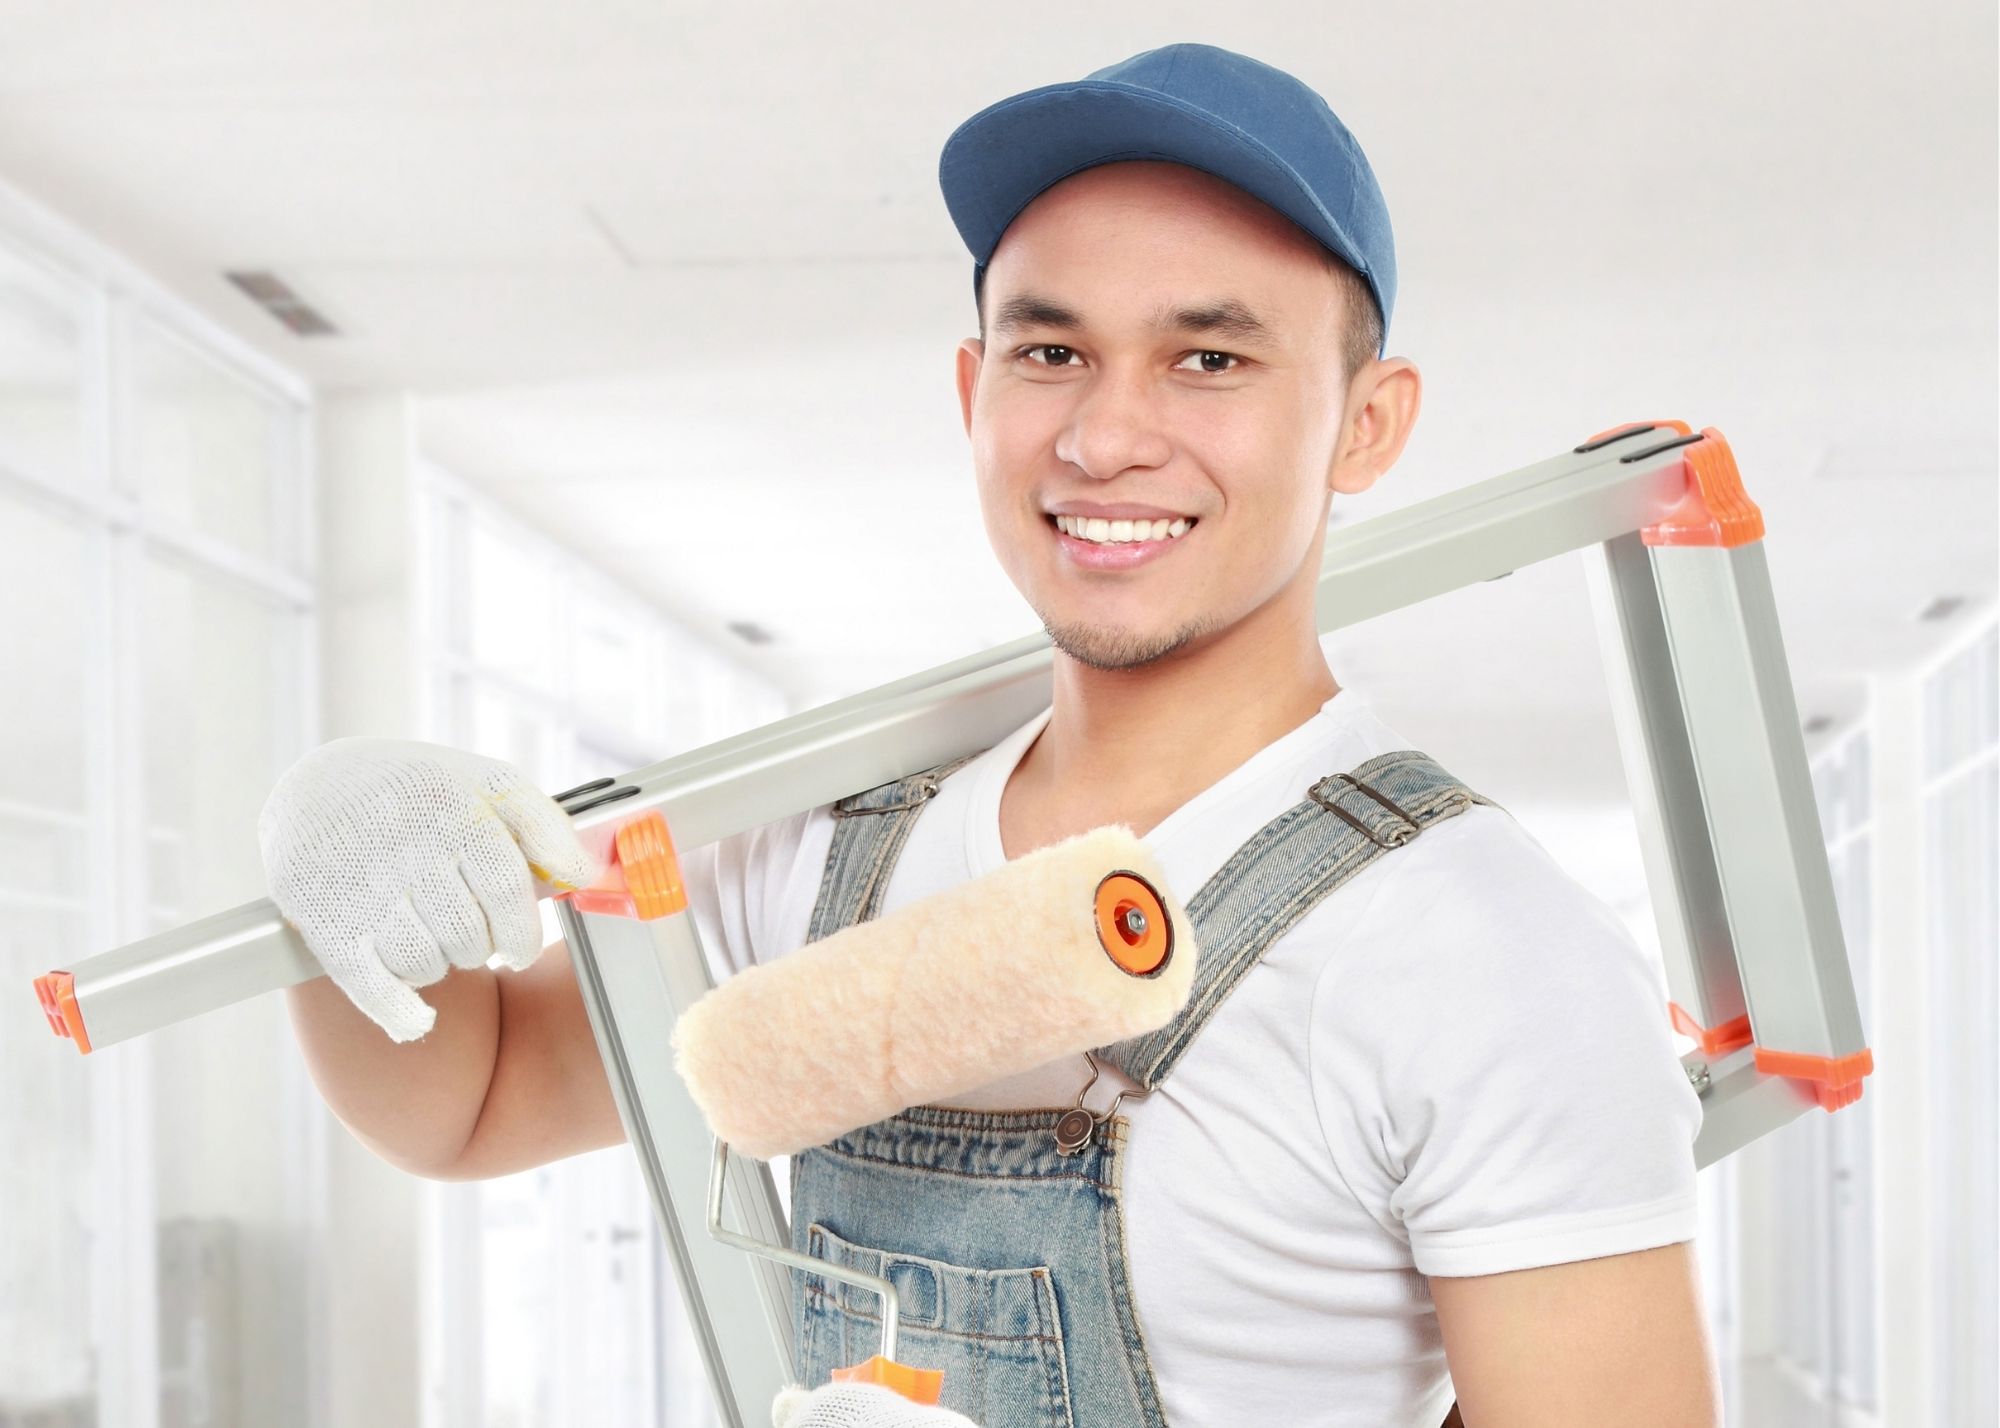 Star City Painting Solutions